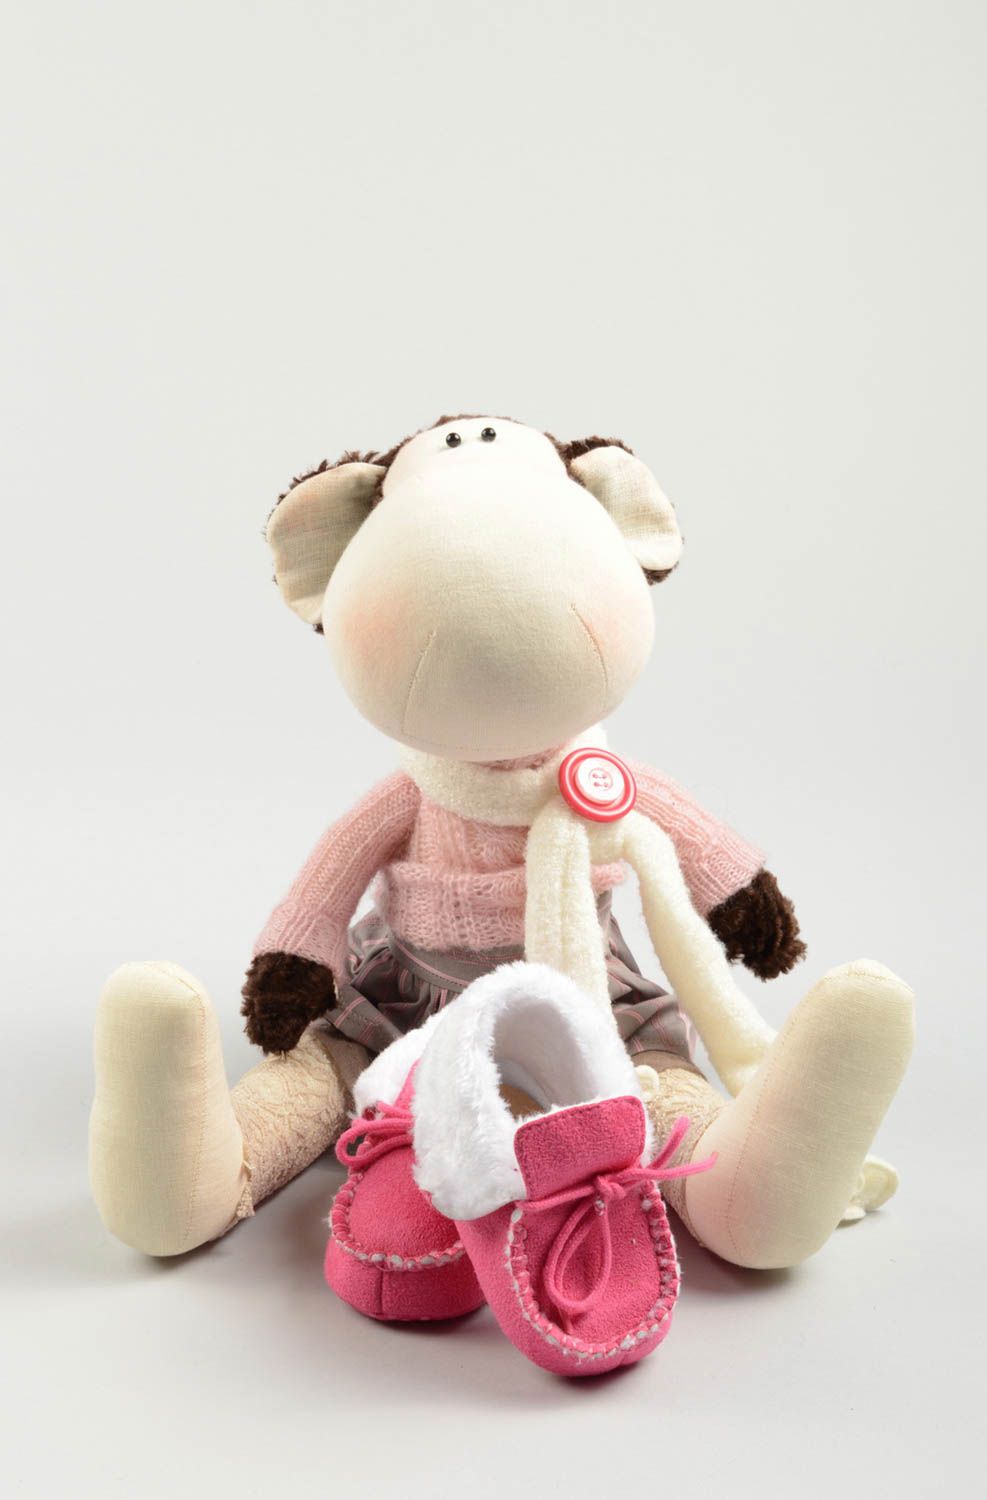 Handmade toy stuffed monkey designer toy soft toy for home decoration nice gift photo 4